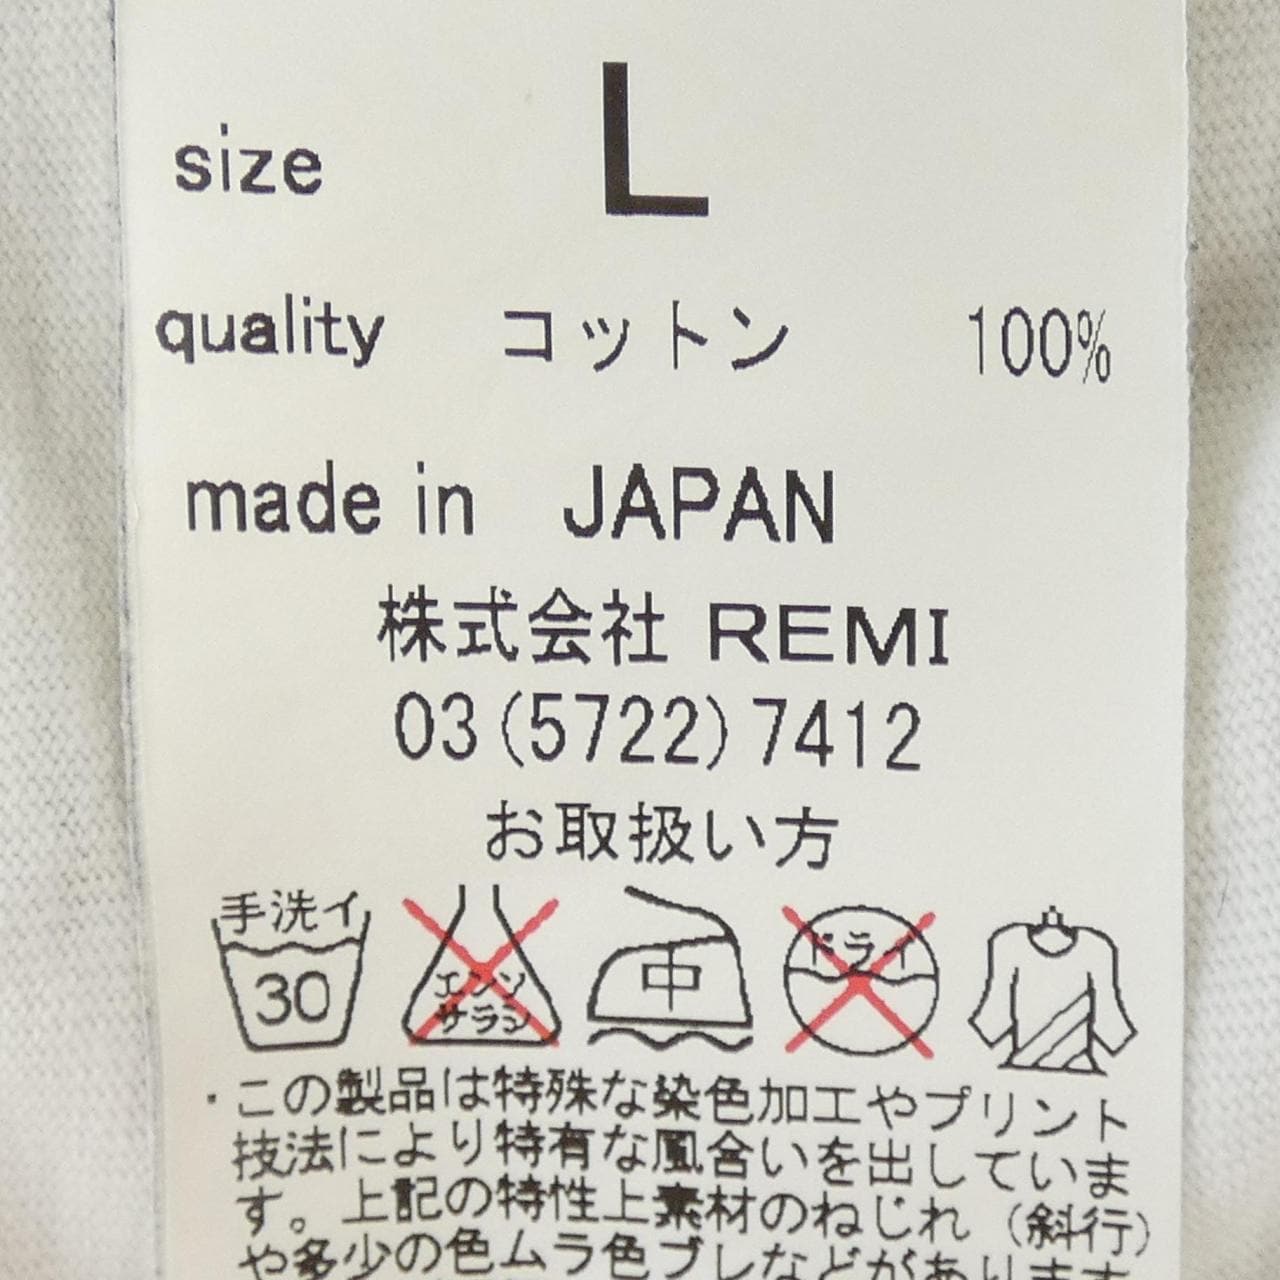 Remi relief REMI RELIEF T-shirt